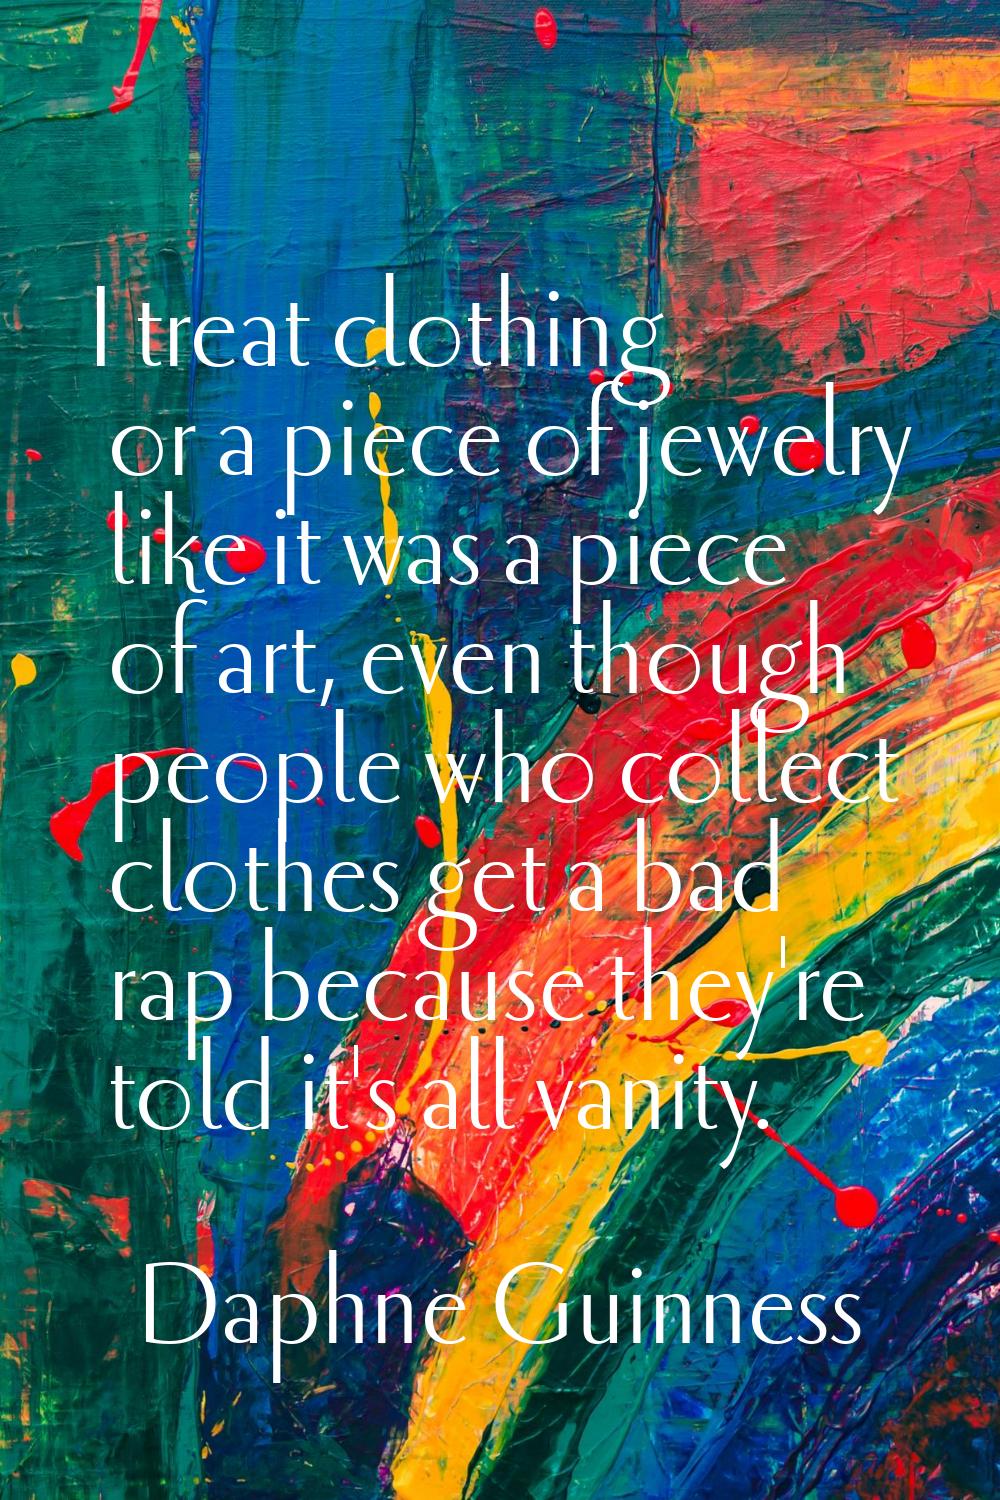 I treat clothing or a piece of jewelry like it was a piece of art, even though people who collect c